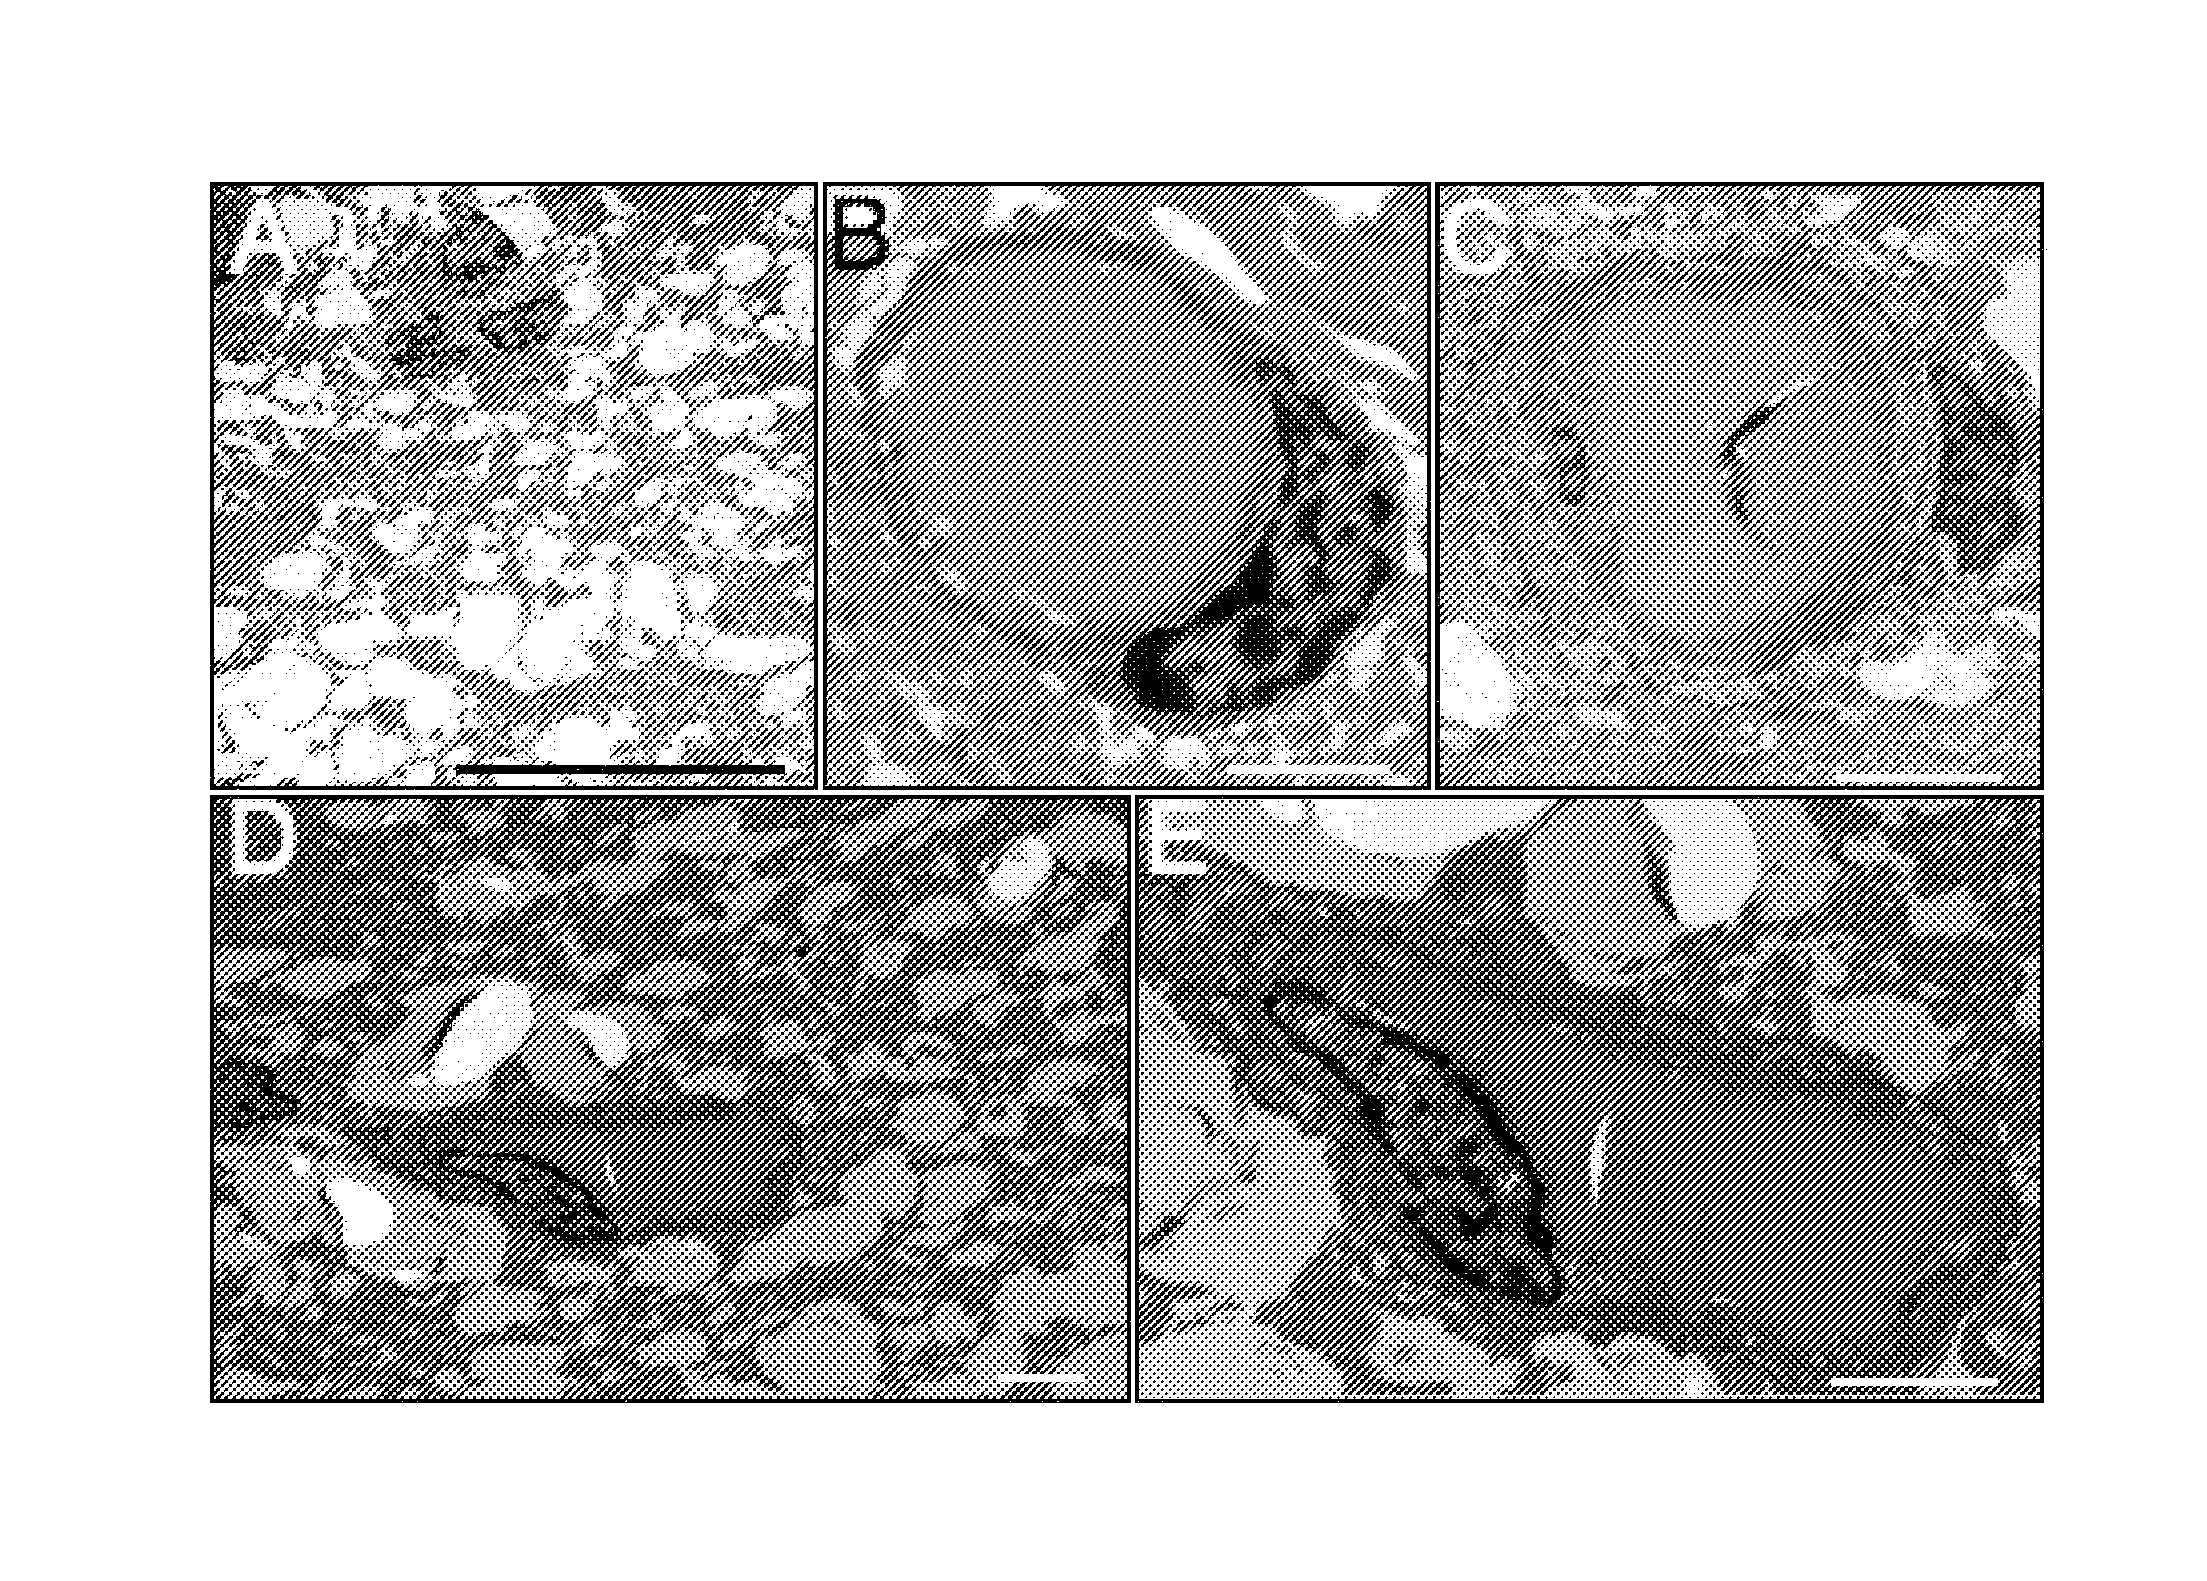 Method for treating chronic nerve tissue injury using a cell therapy strategy